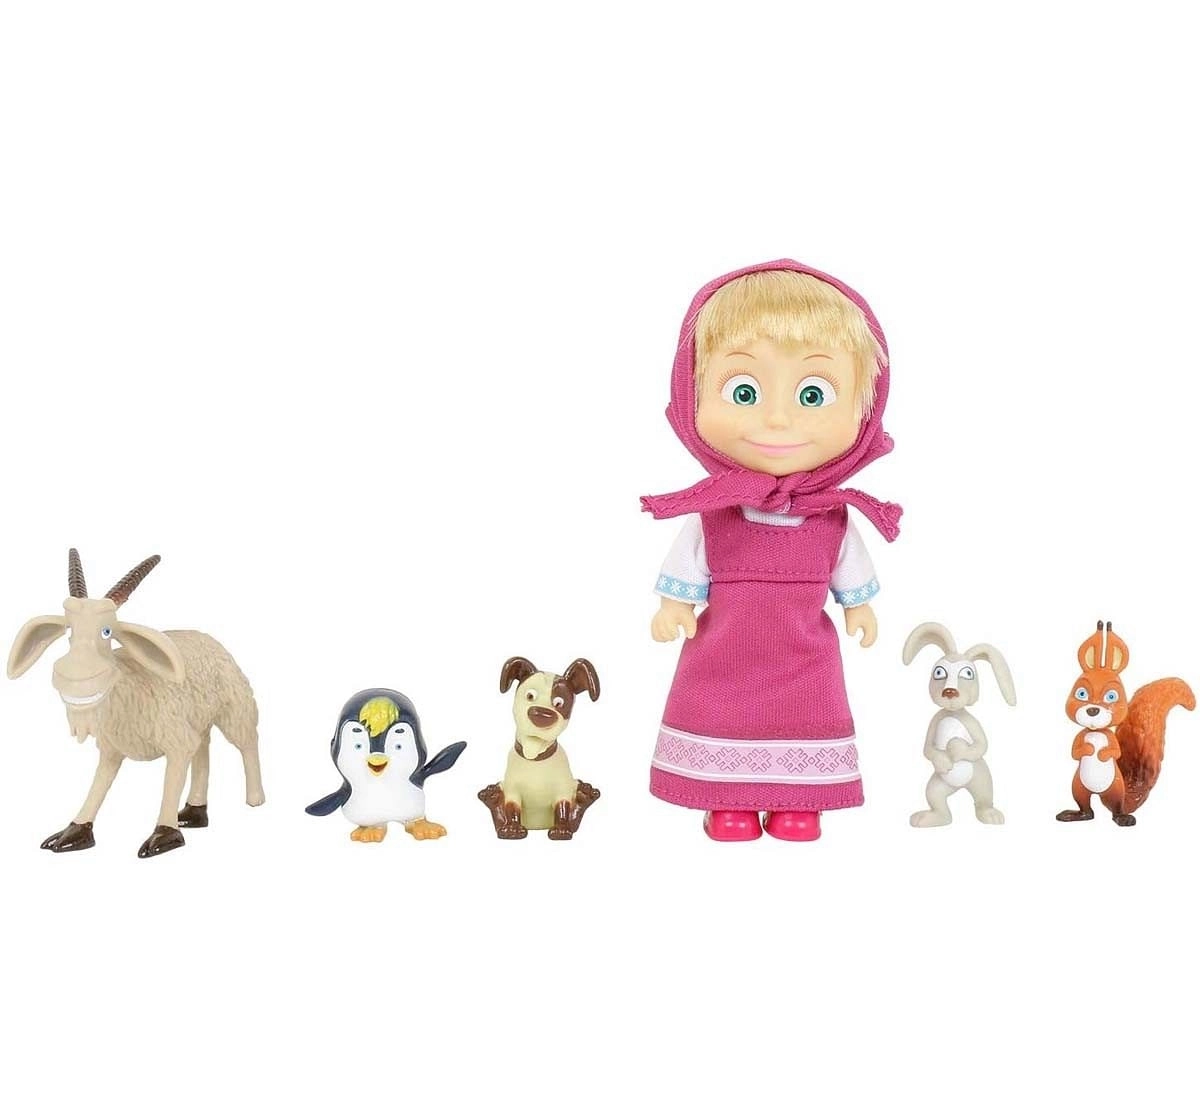 Masha And The Bear with her Animal Friends Roleplay sets for age 3Y+ 